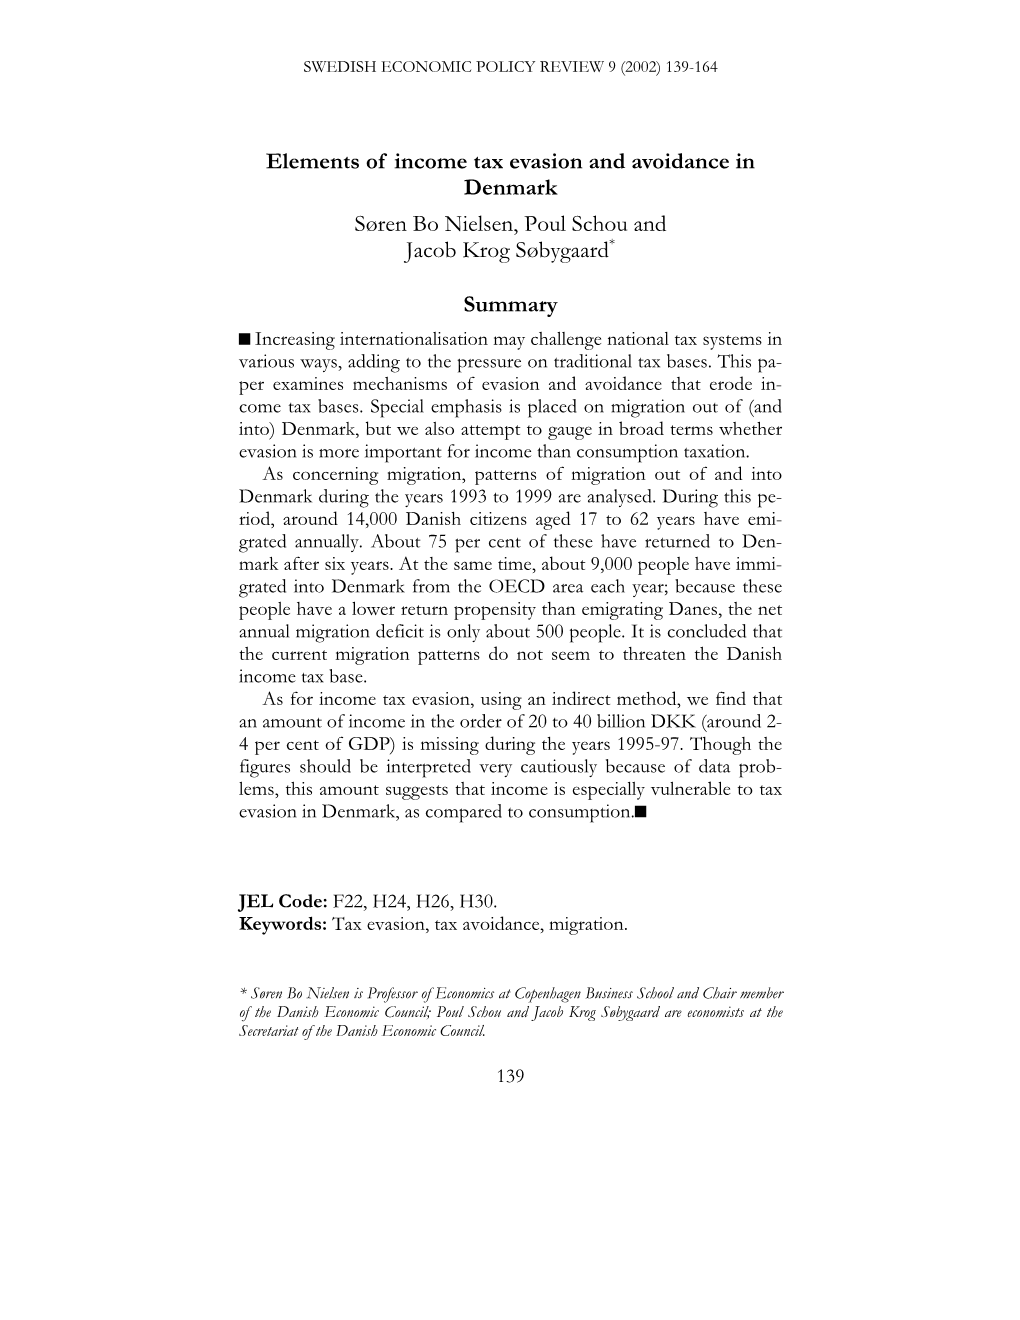 Elements of Income Tax Evasion and Avoidance in Denmark Søren Bo Nielsen, Poul Schou and Jacob Krog Søbygaard* Summary